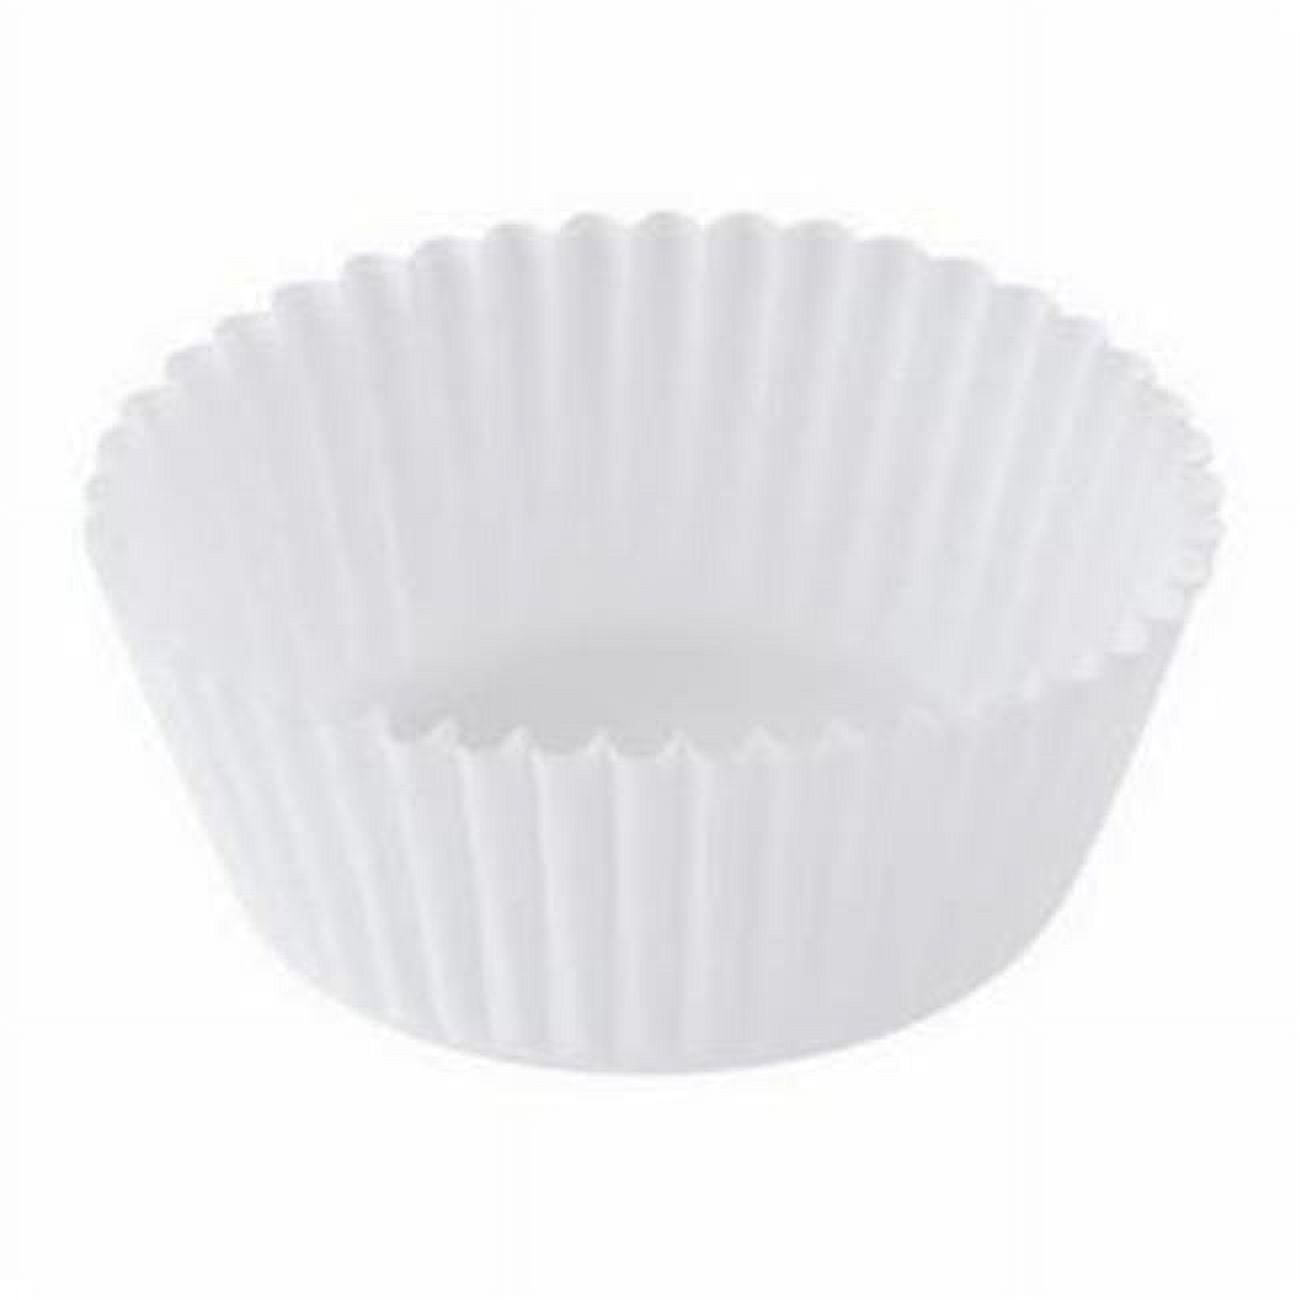 Reynolds Fc150x350 3.5 In. Paperboard Baking Cup - Case Of 10000